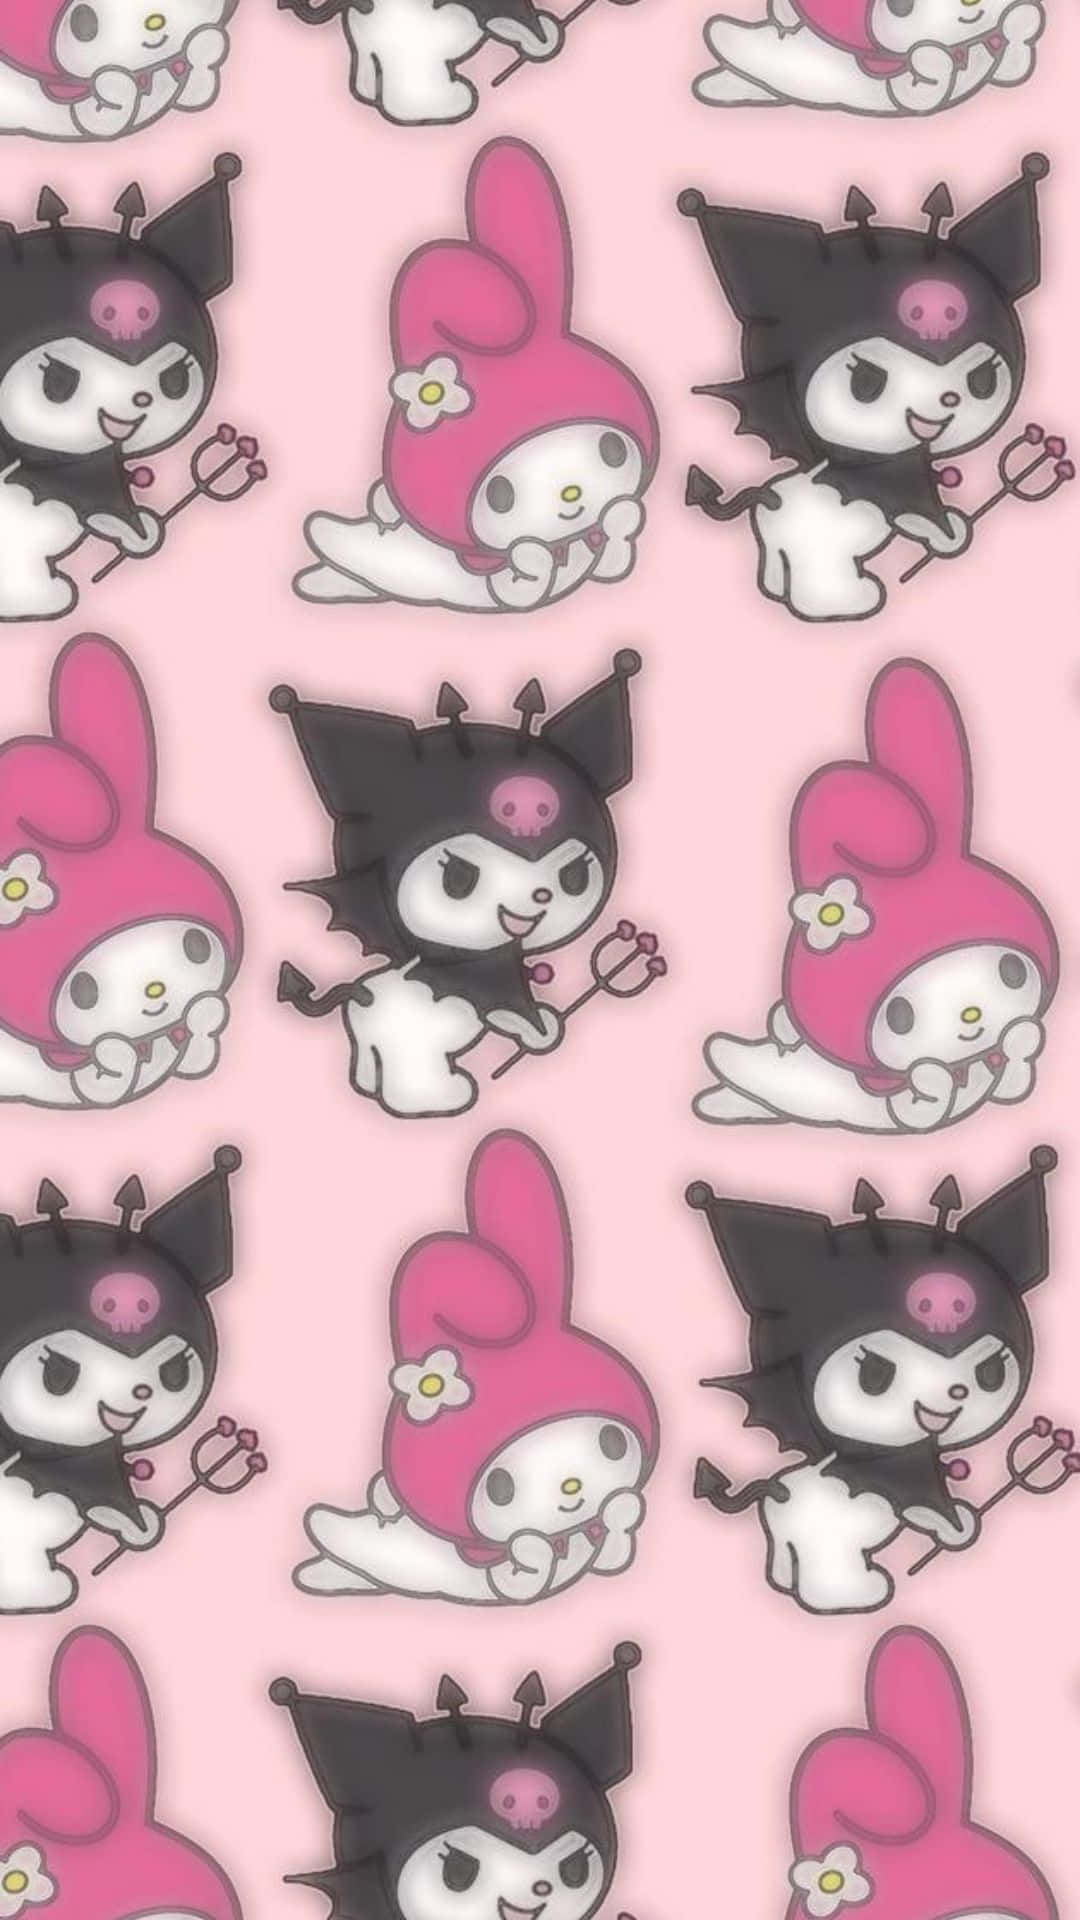 Kuromi and My Melody striking pose together in this cute anime-style wallpaper Wallpaper